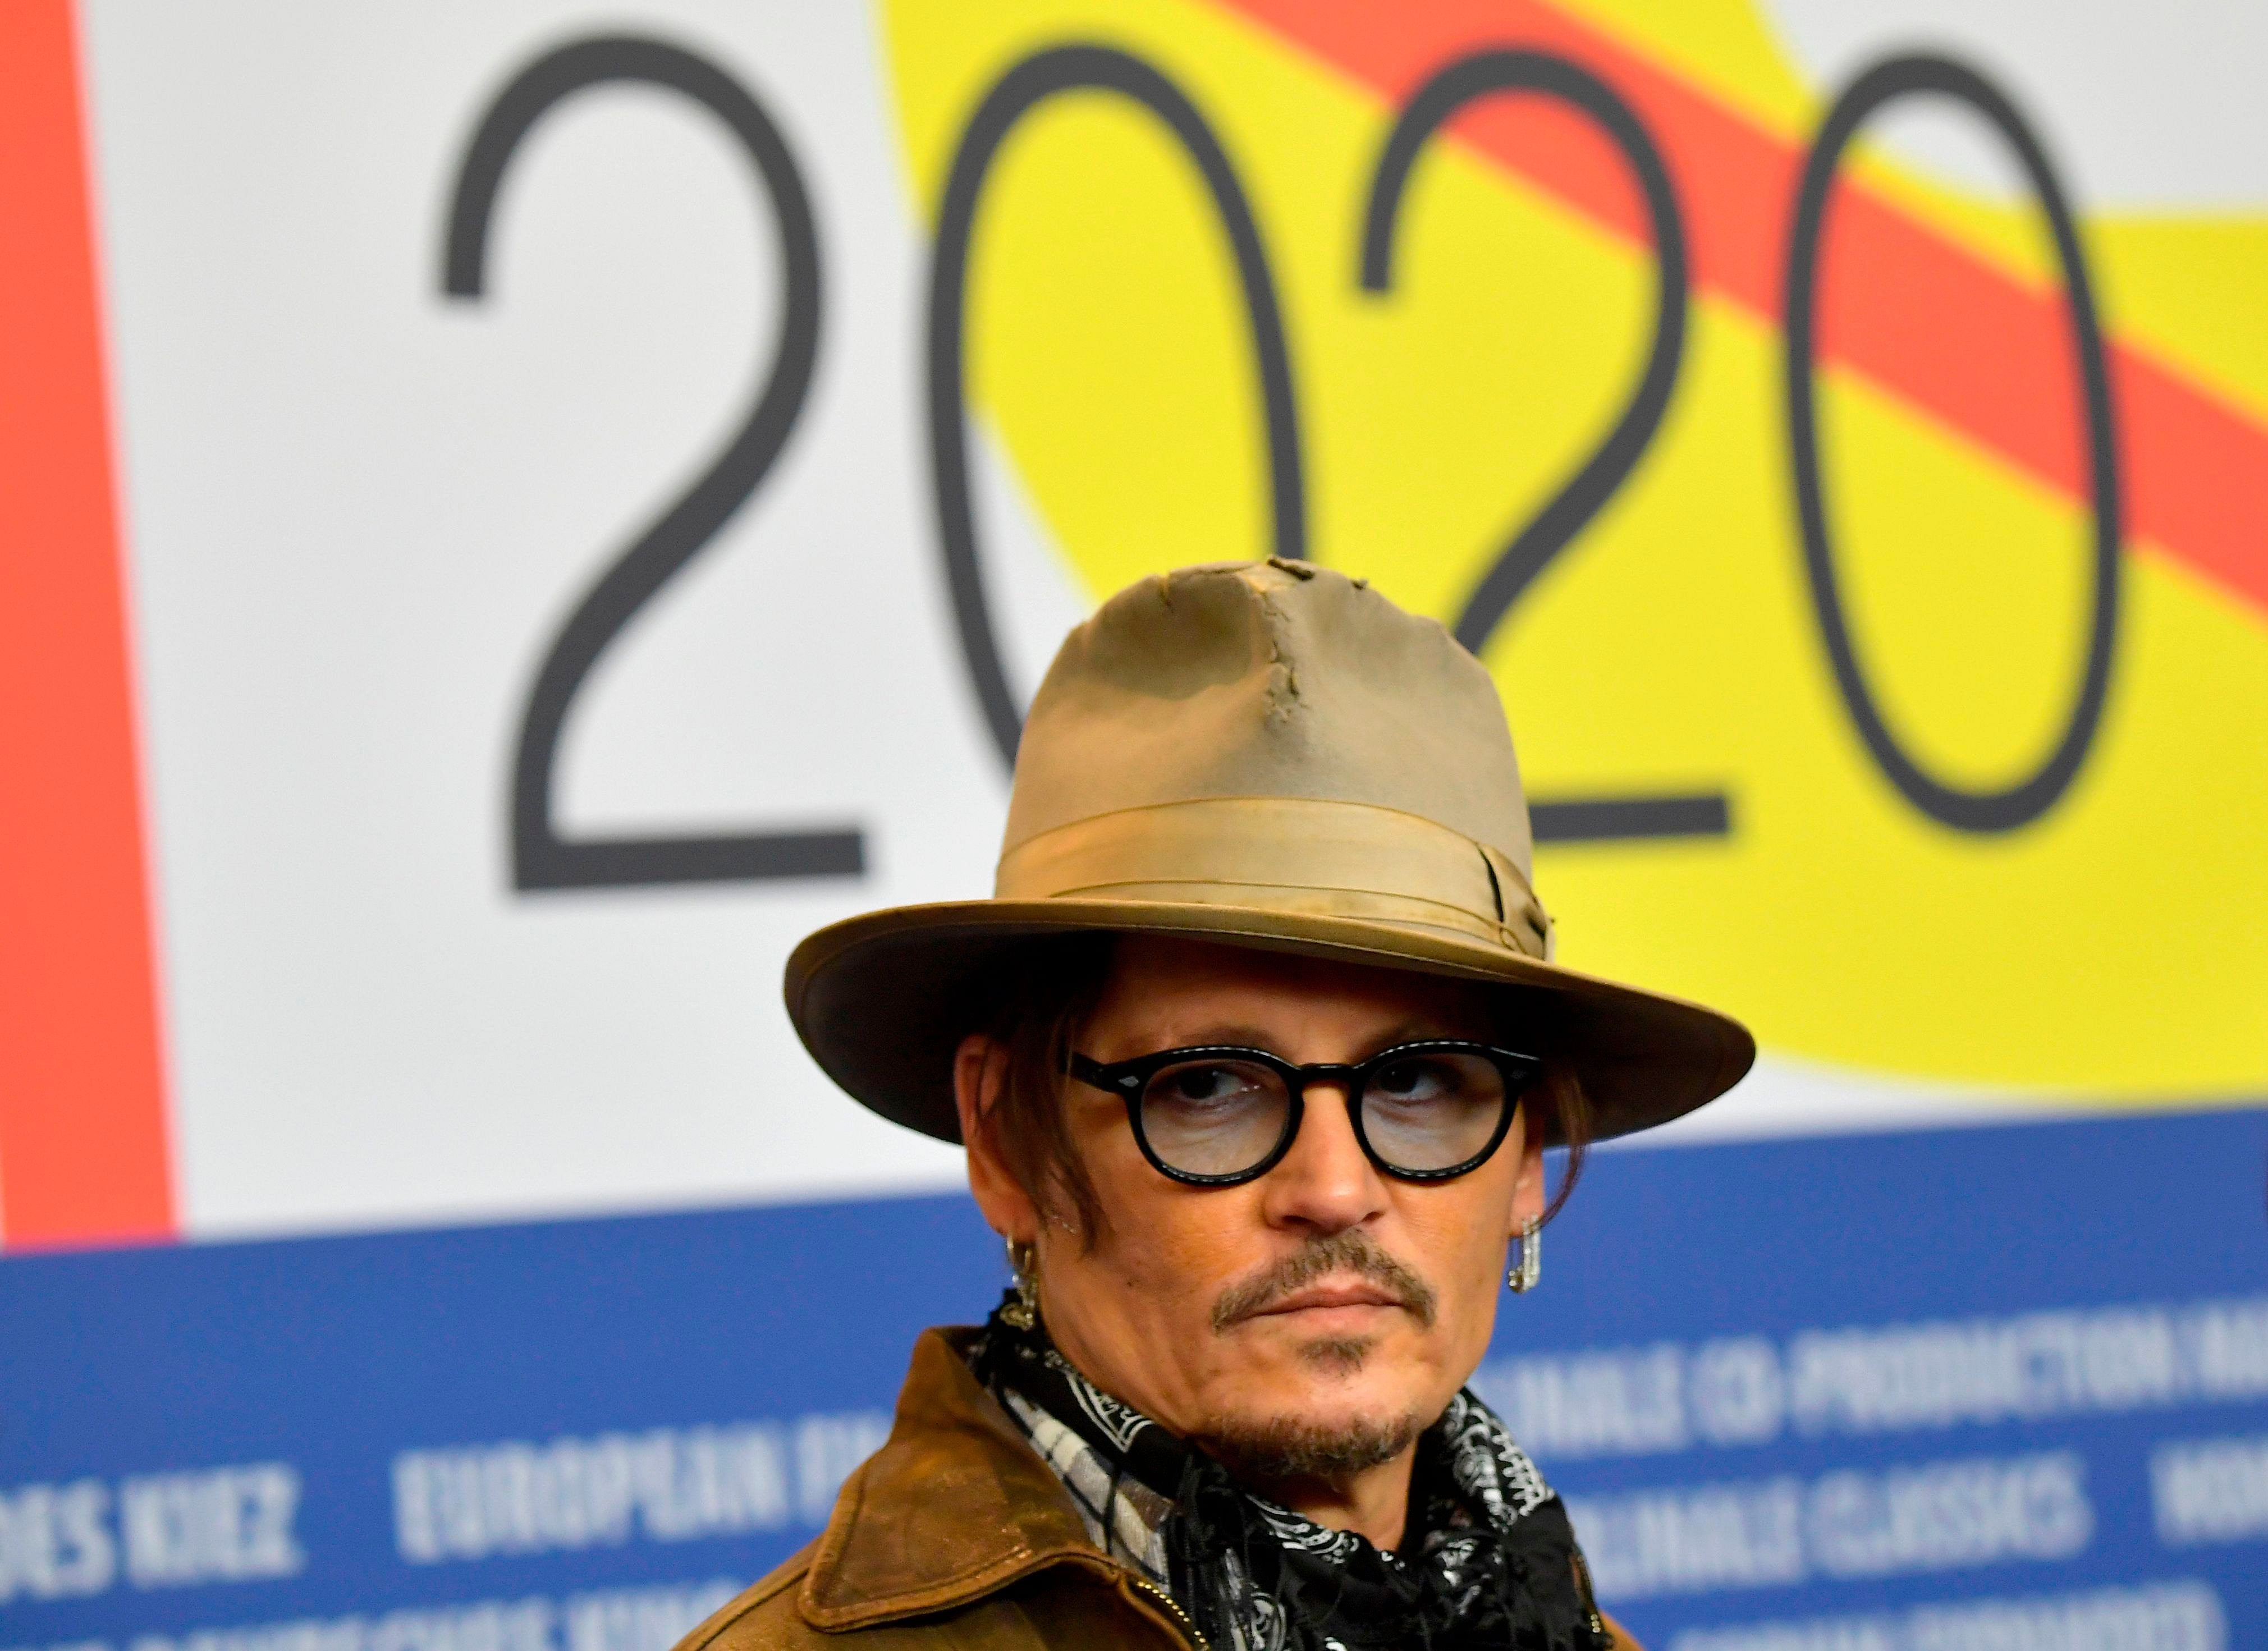 Johnny Depp married actress Amber Heard in February 2015 but she filed for divorce after just 15 months. She has accused him of physical abuse during their relationship, allegations he denies. Credit: AFP Photo